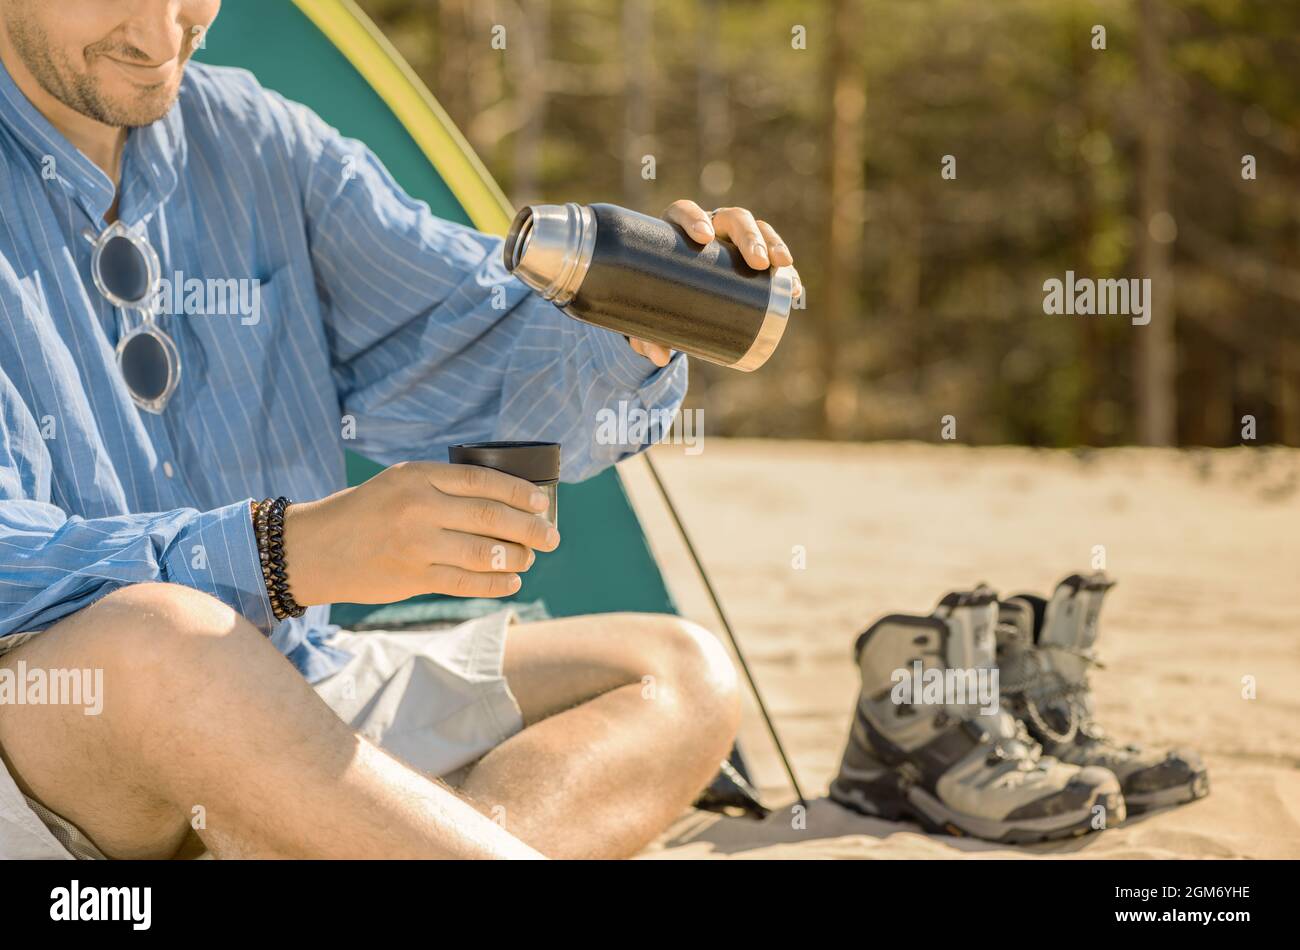 Smiling Caucasian man is sitting next to his tourist tent and holding a thermos bottle of tea in his hand in outdoors. Stock Photo